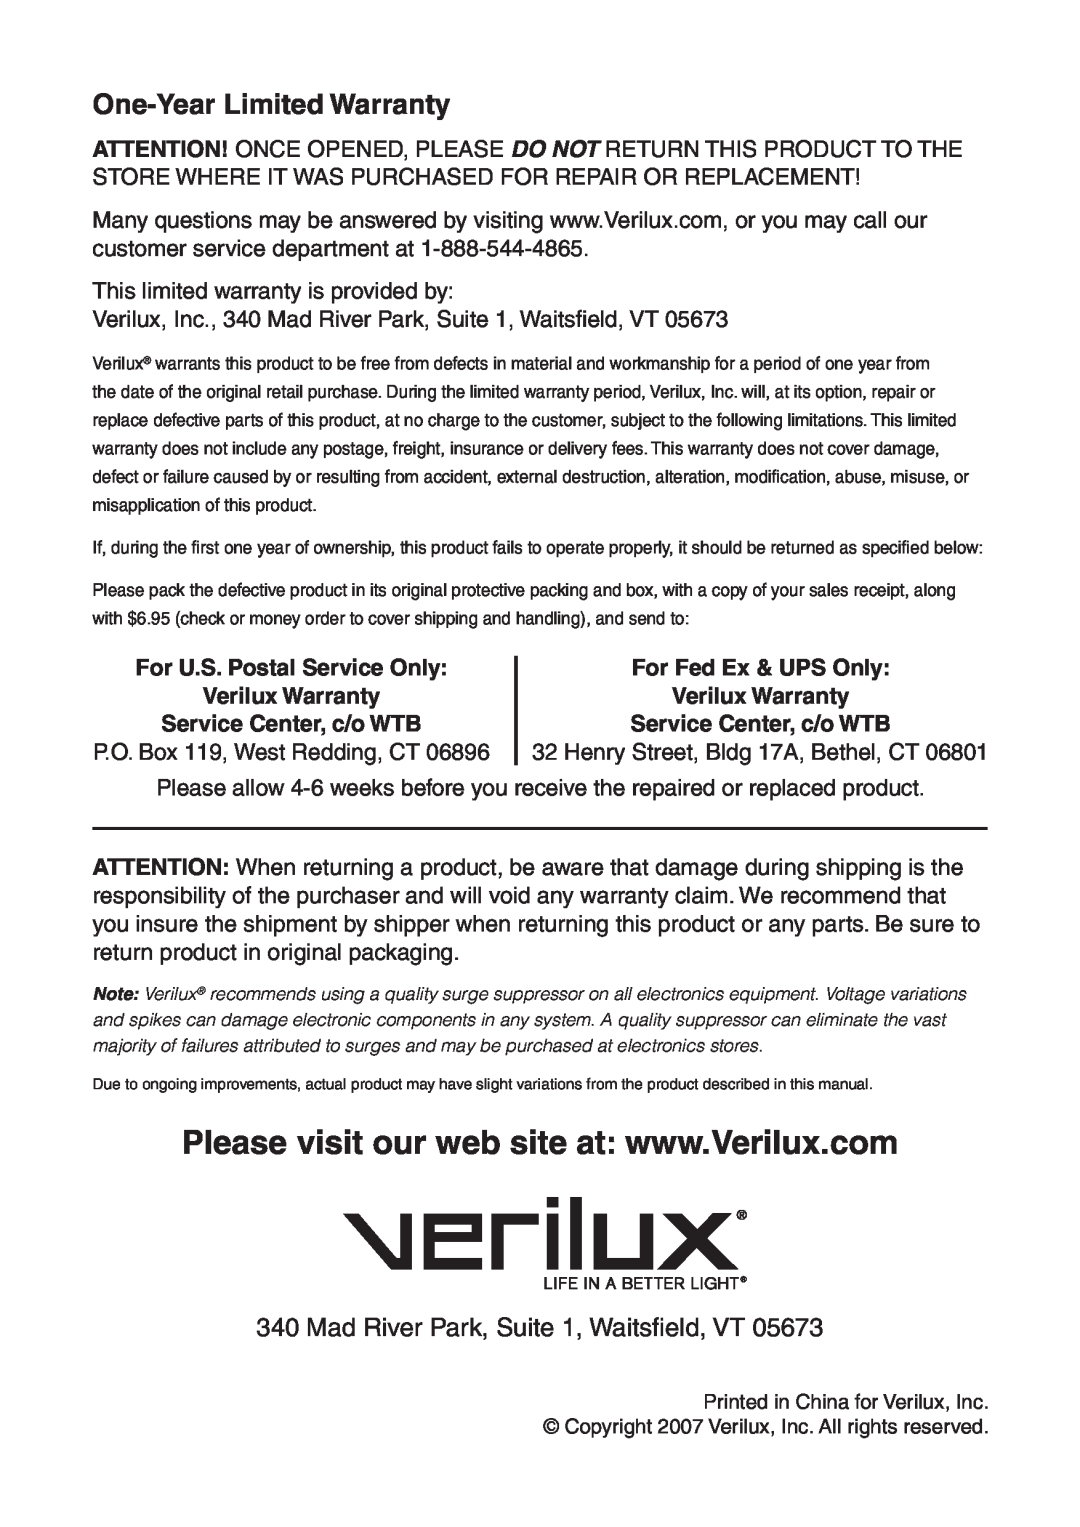 Verilux VD04 manual One-YearLimited Warranty, Mad River Park, Suite 1, Waitsﬁeld, VT, Service Center, c/o WTB 